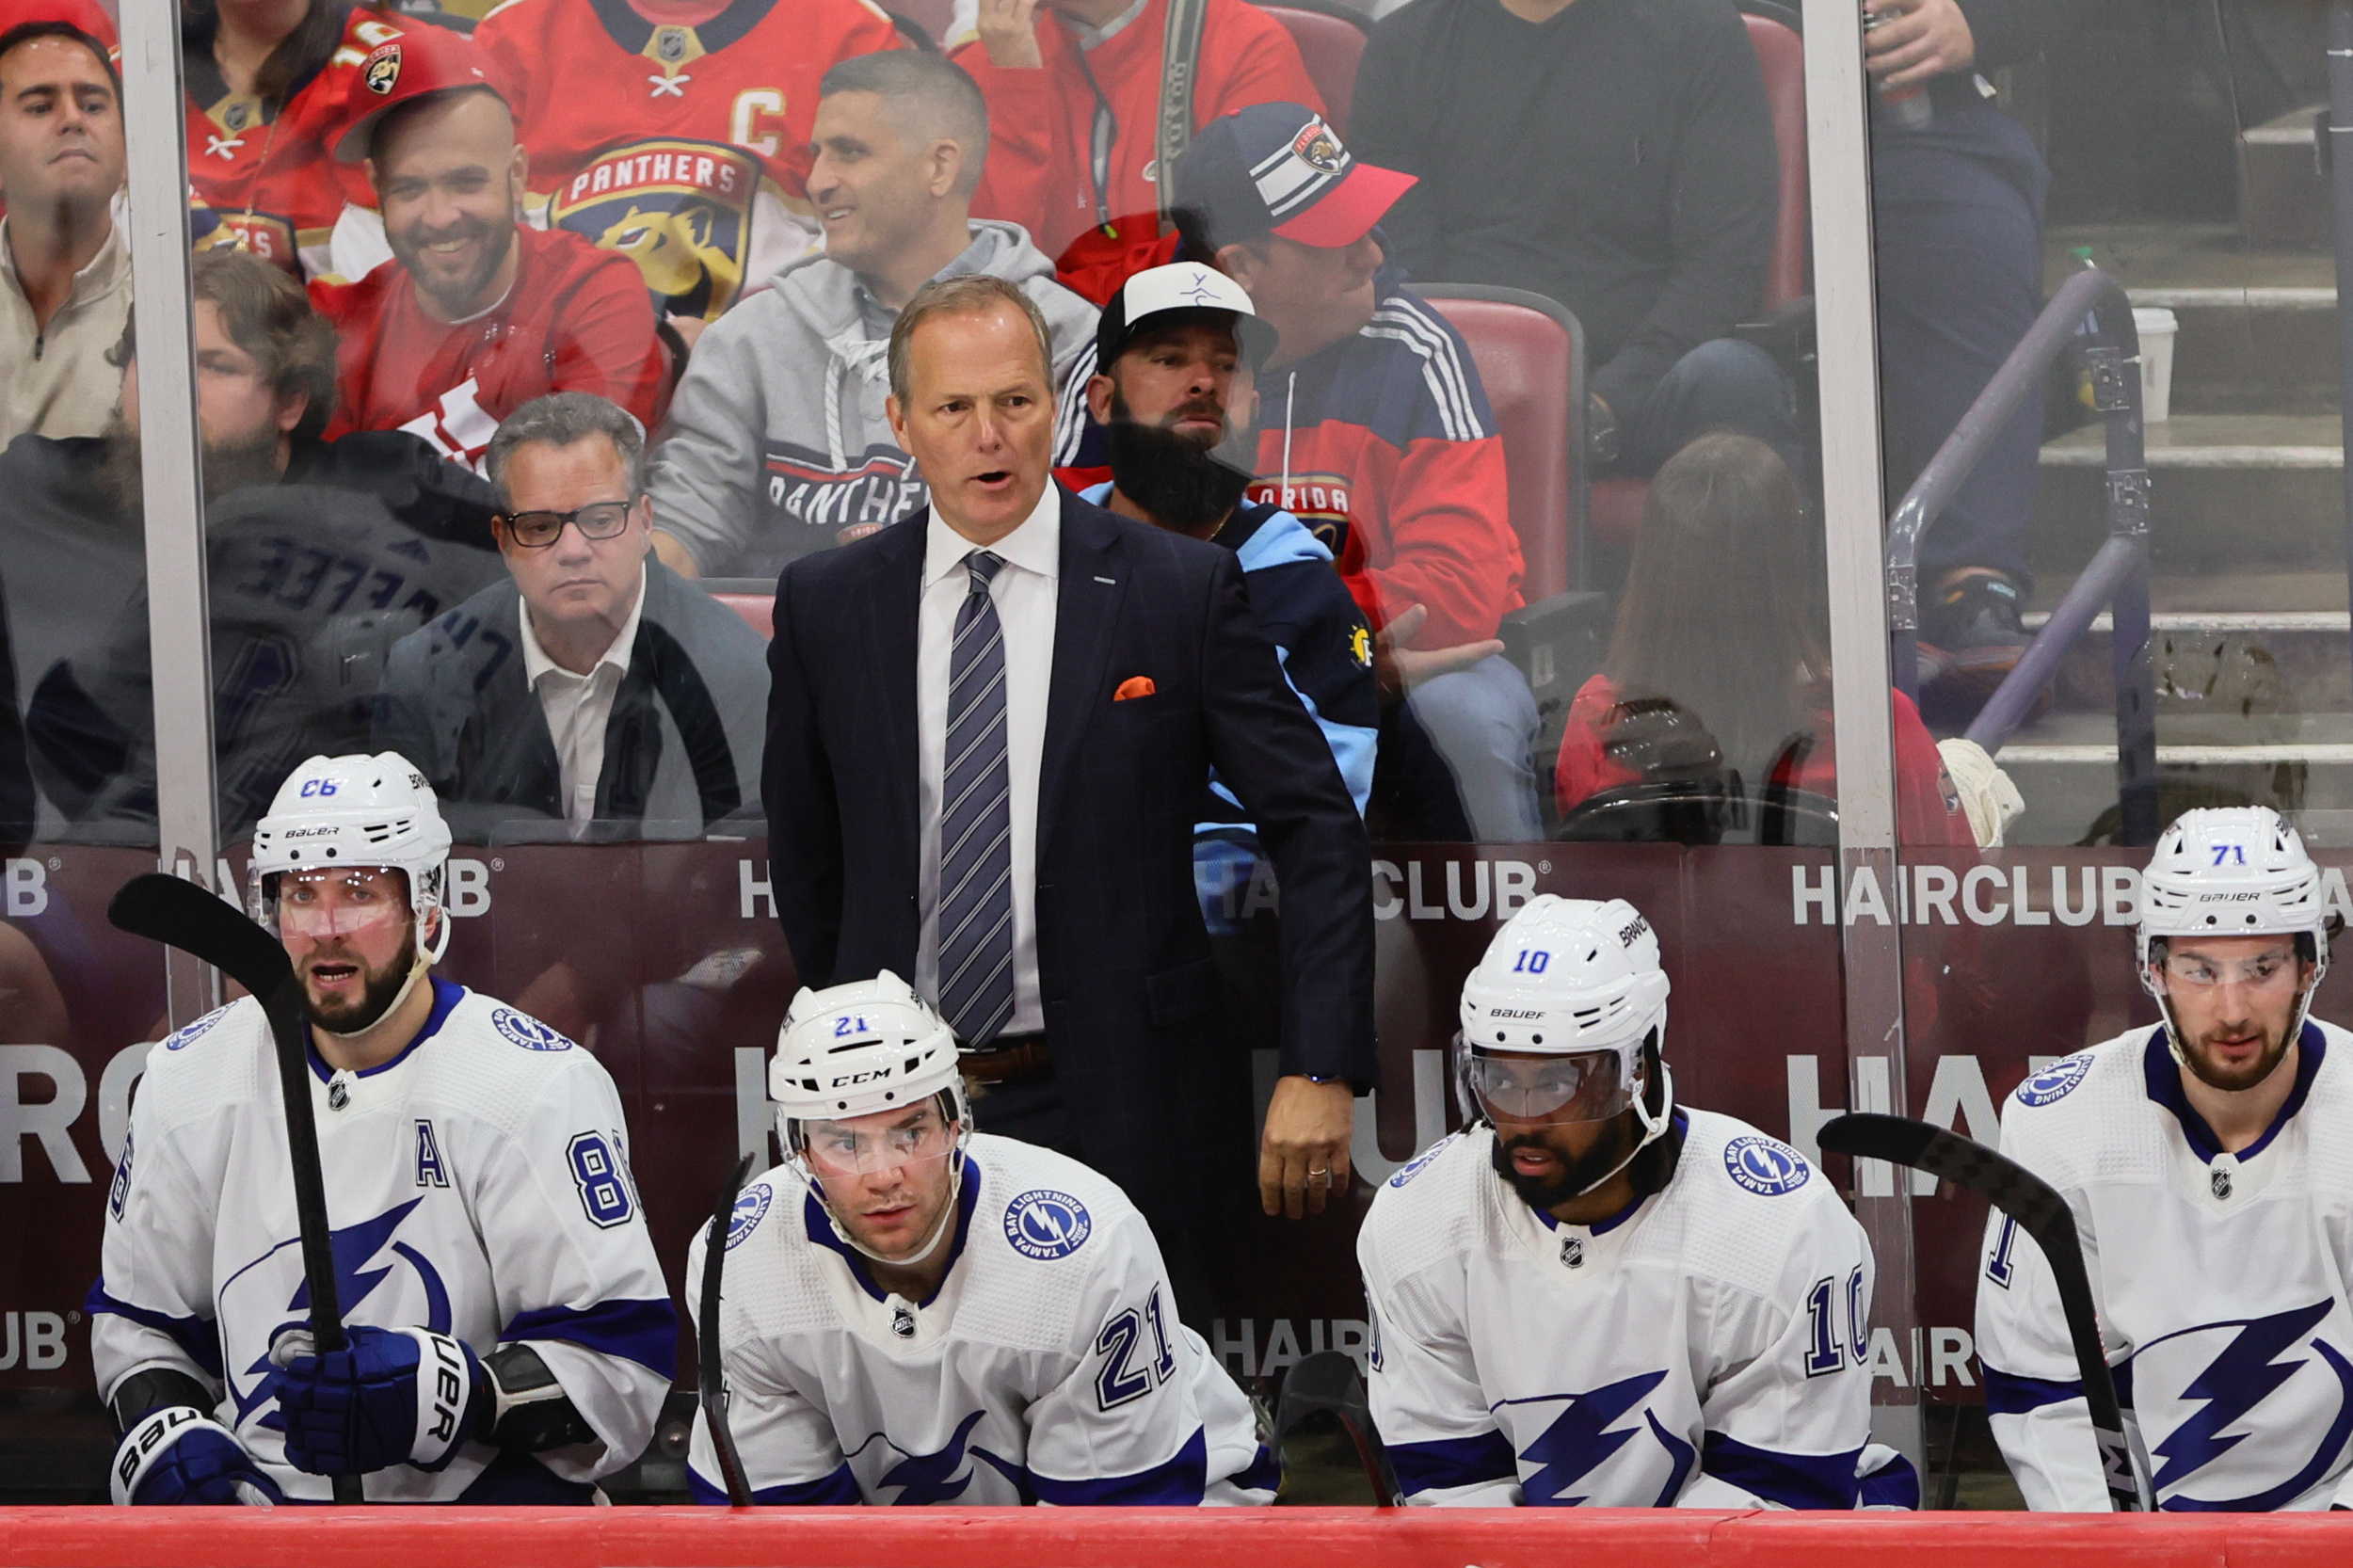 lightning hc's controversial comment caused him more pain than series defeat